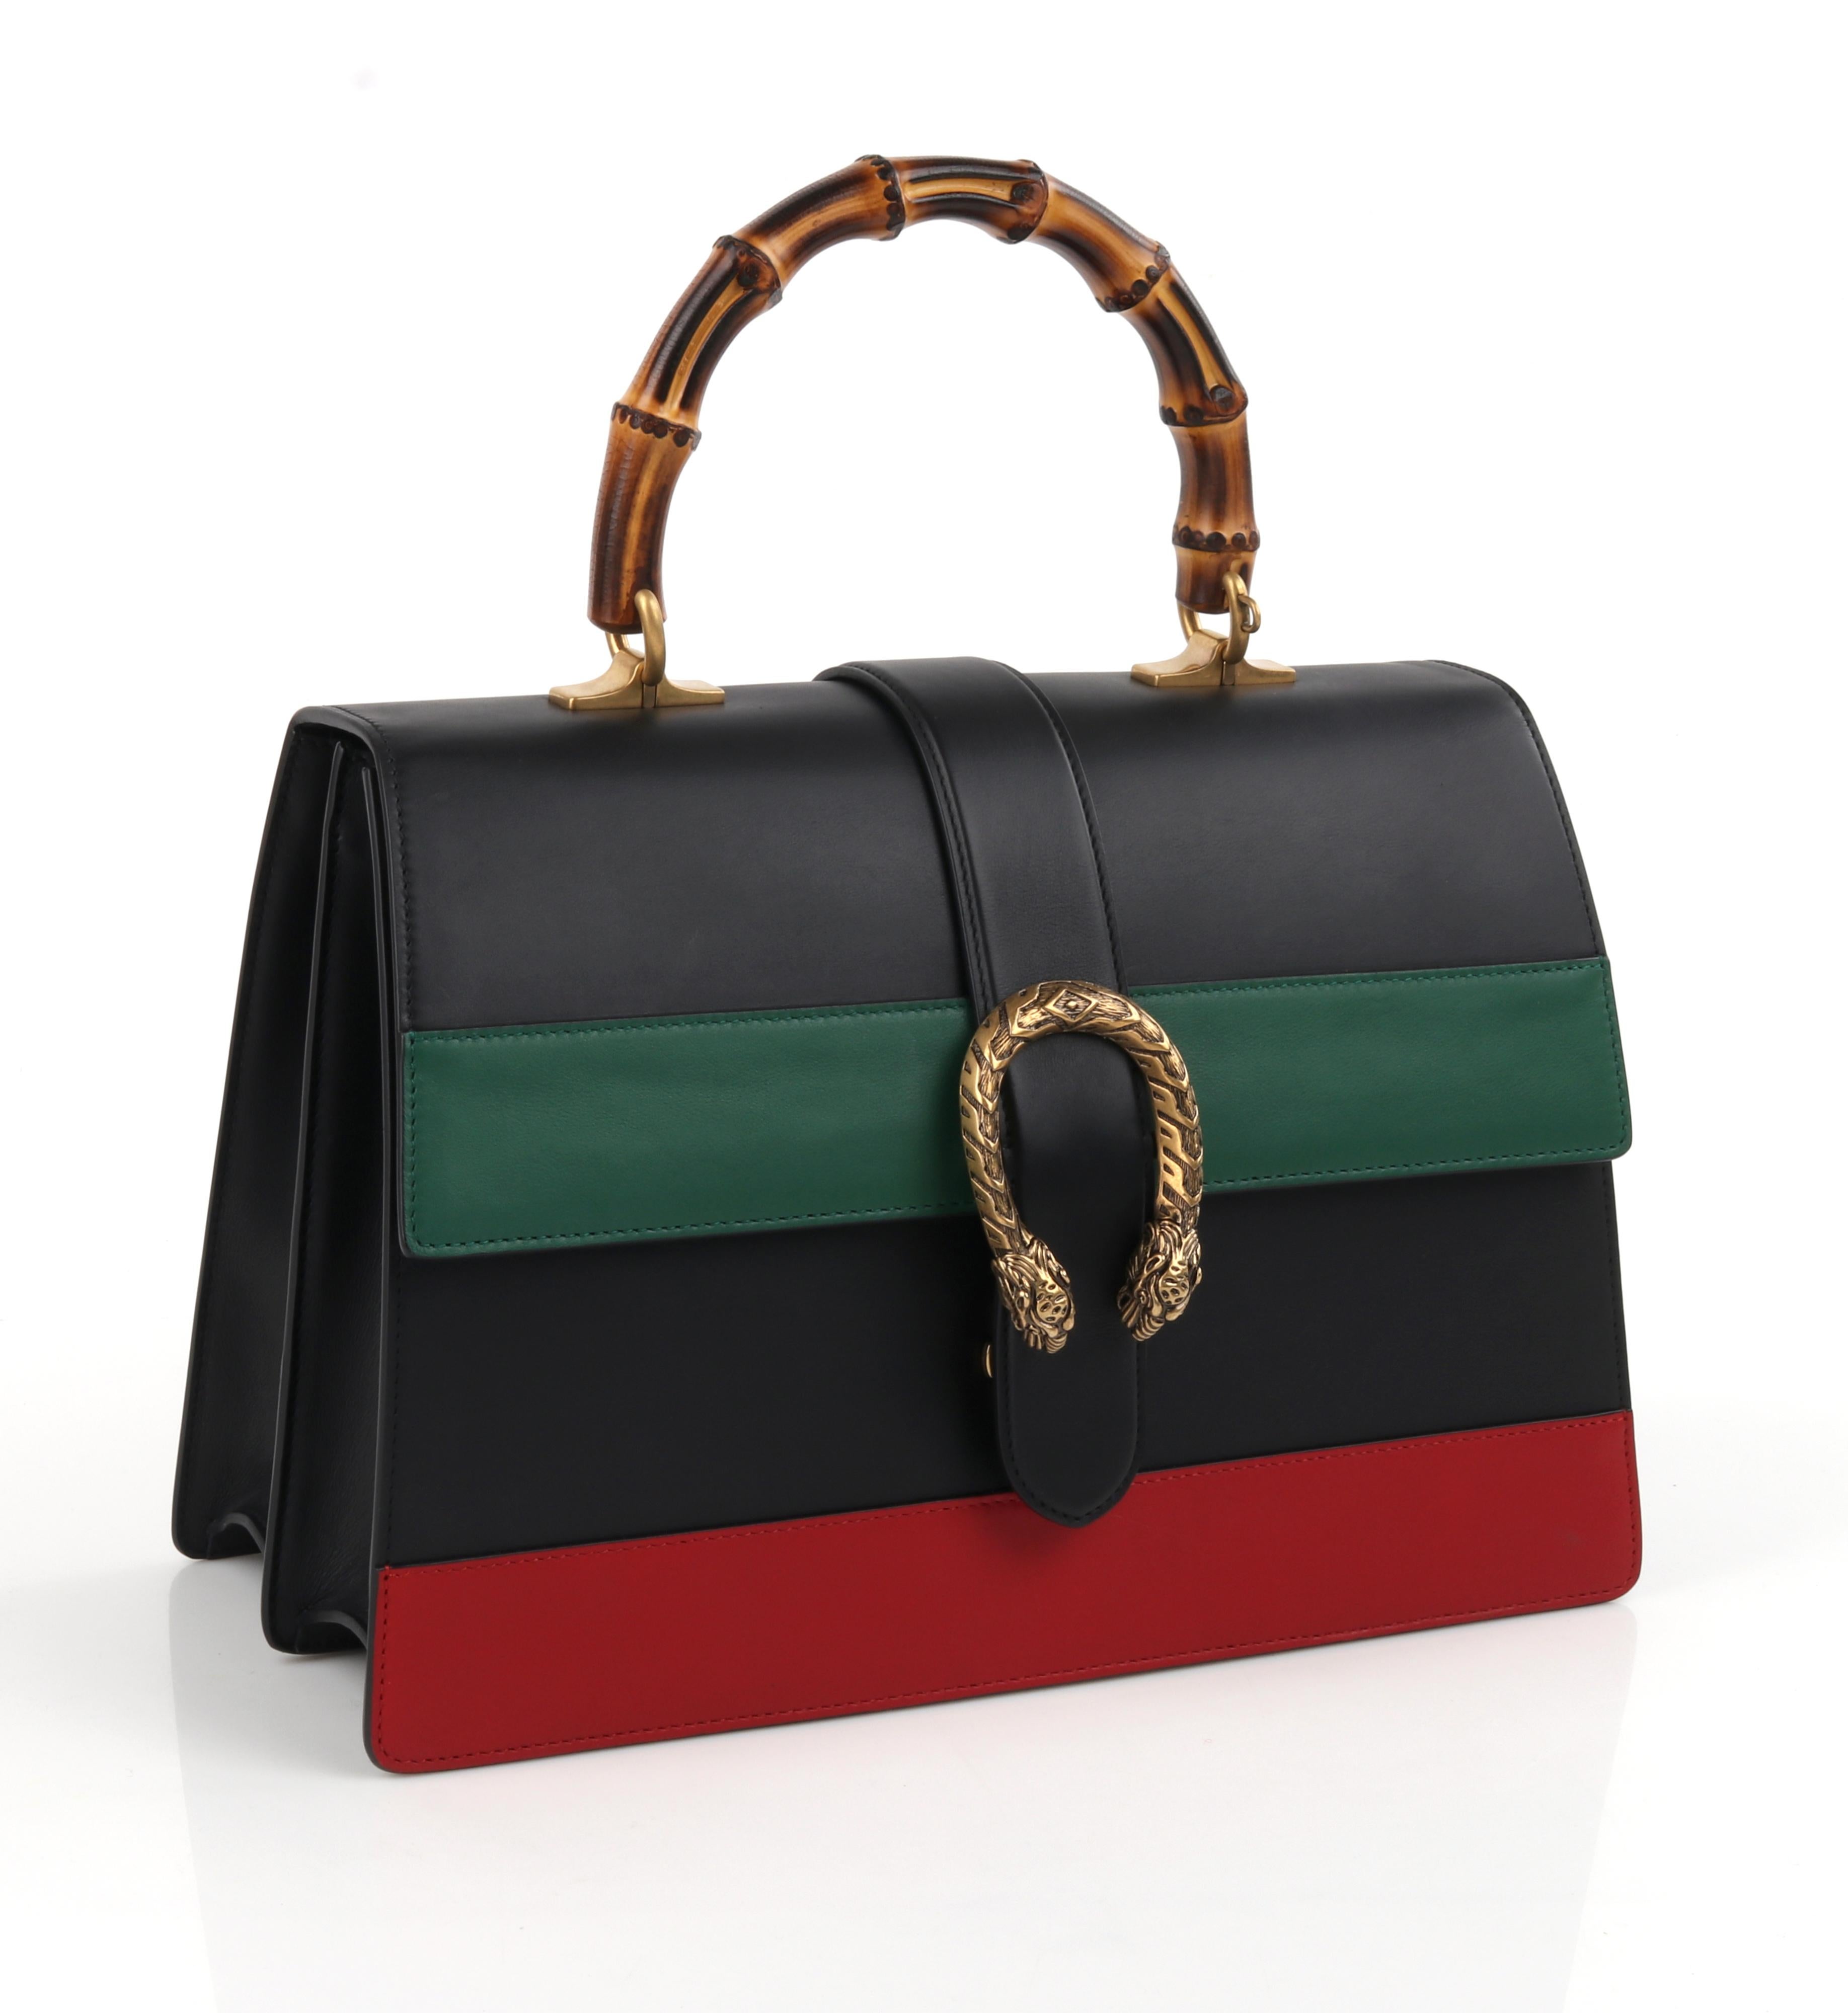 GUCCI S/S 2016 “Dionysus” Large Green Red Black Striped Bamboo Top Handle Bag NWB
 
Estimated Retail: $3,700.00
 
Brand/Manufacturer: Gucci 
Collection: S/S 2016 - Runway Look #11
Designer: Alessandro Michele 
Style: Top-handle bag
Color(s): Black,